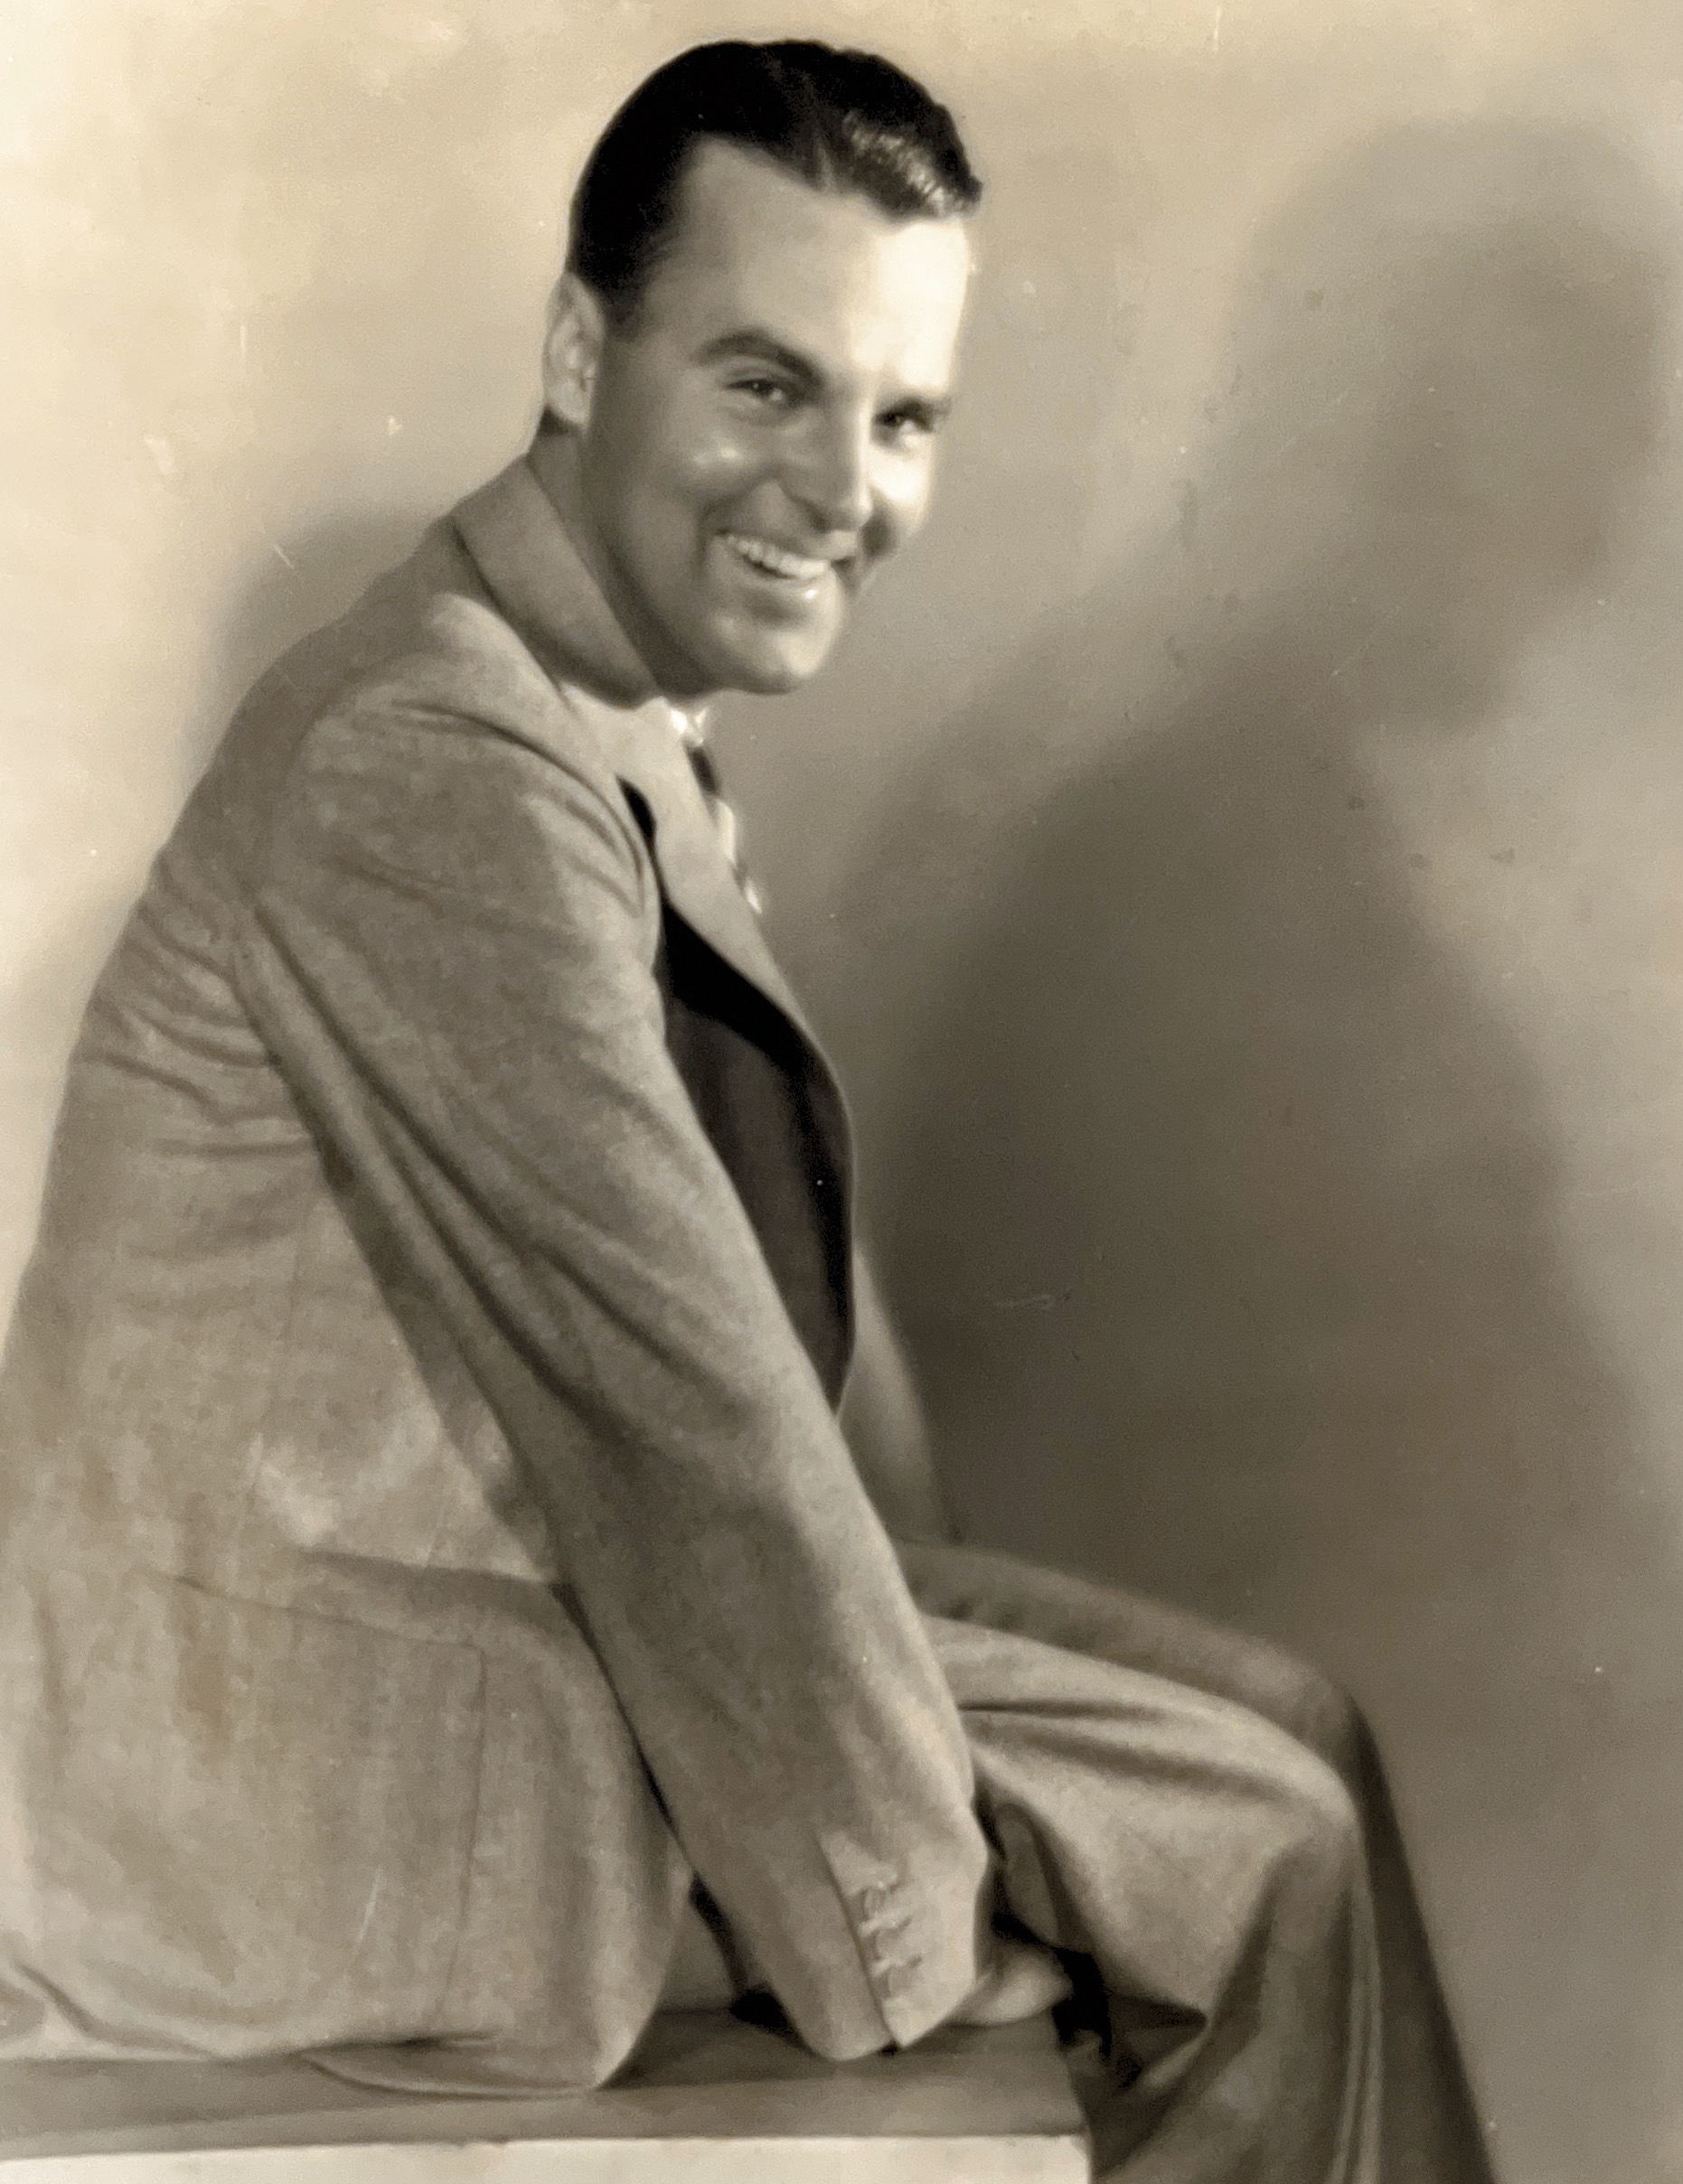 Neil Hamilton photographed by Elmer Fryer in 1930.